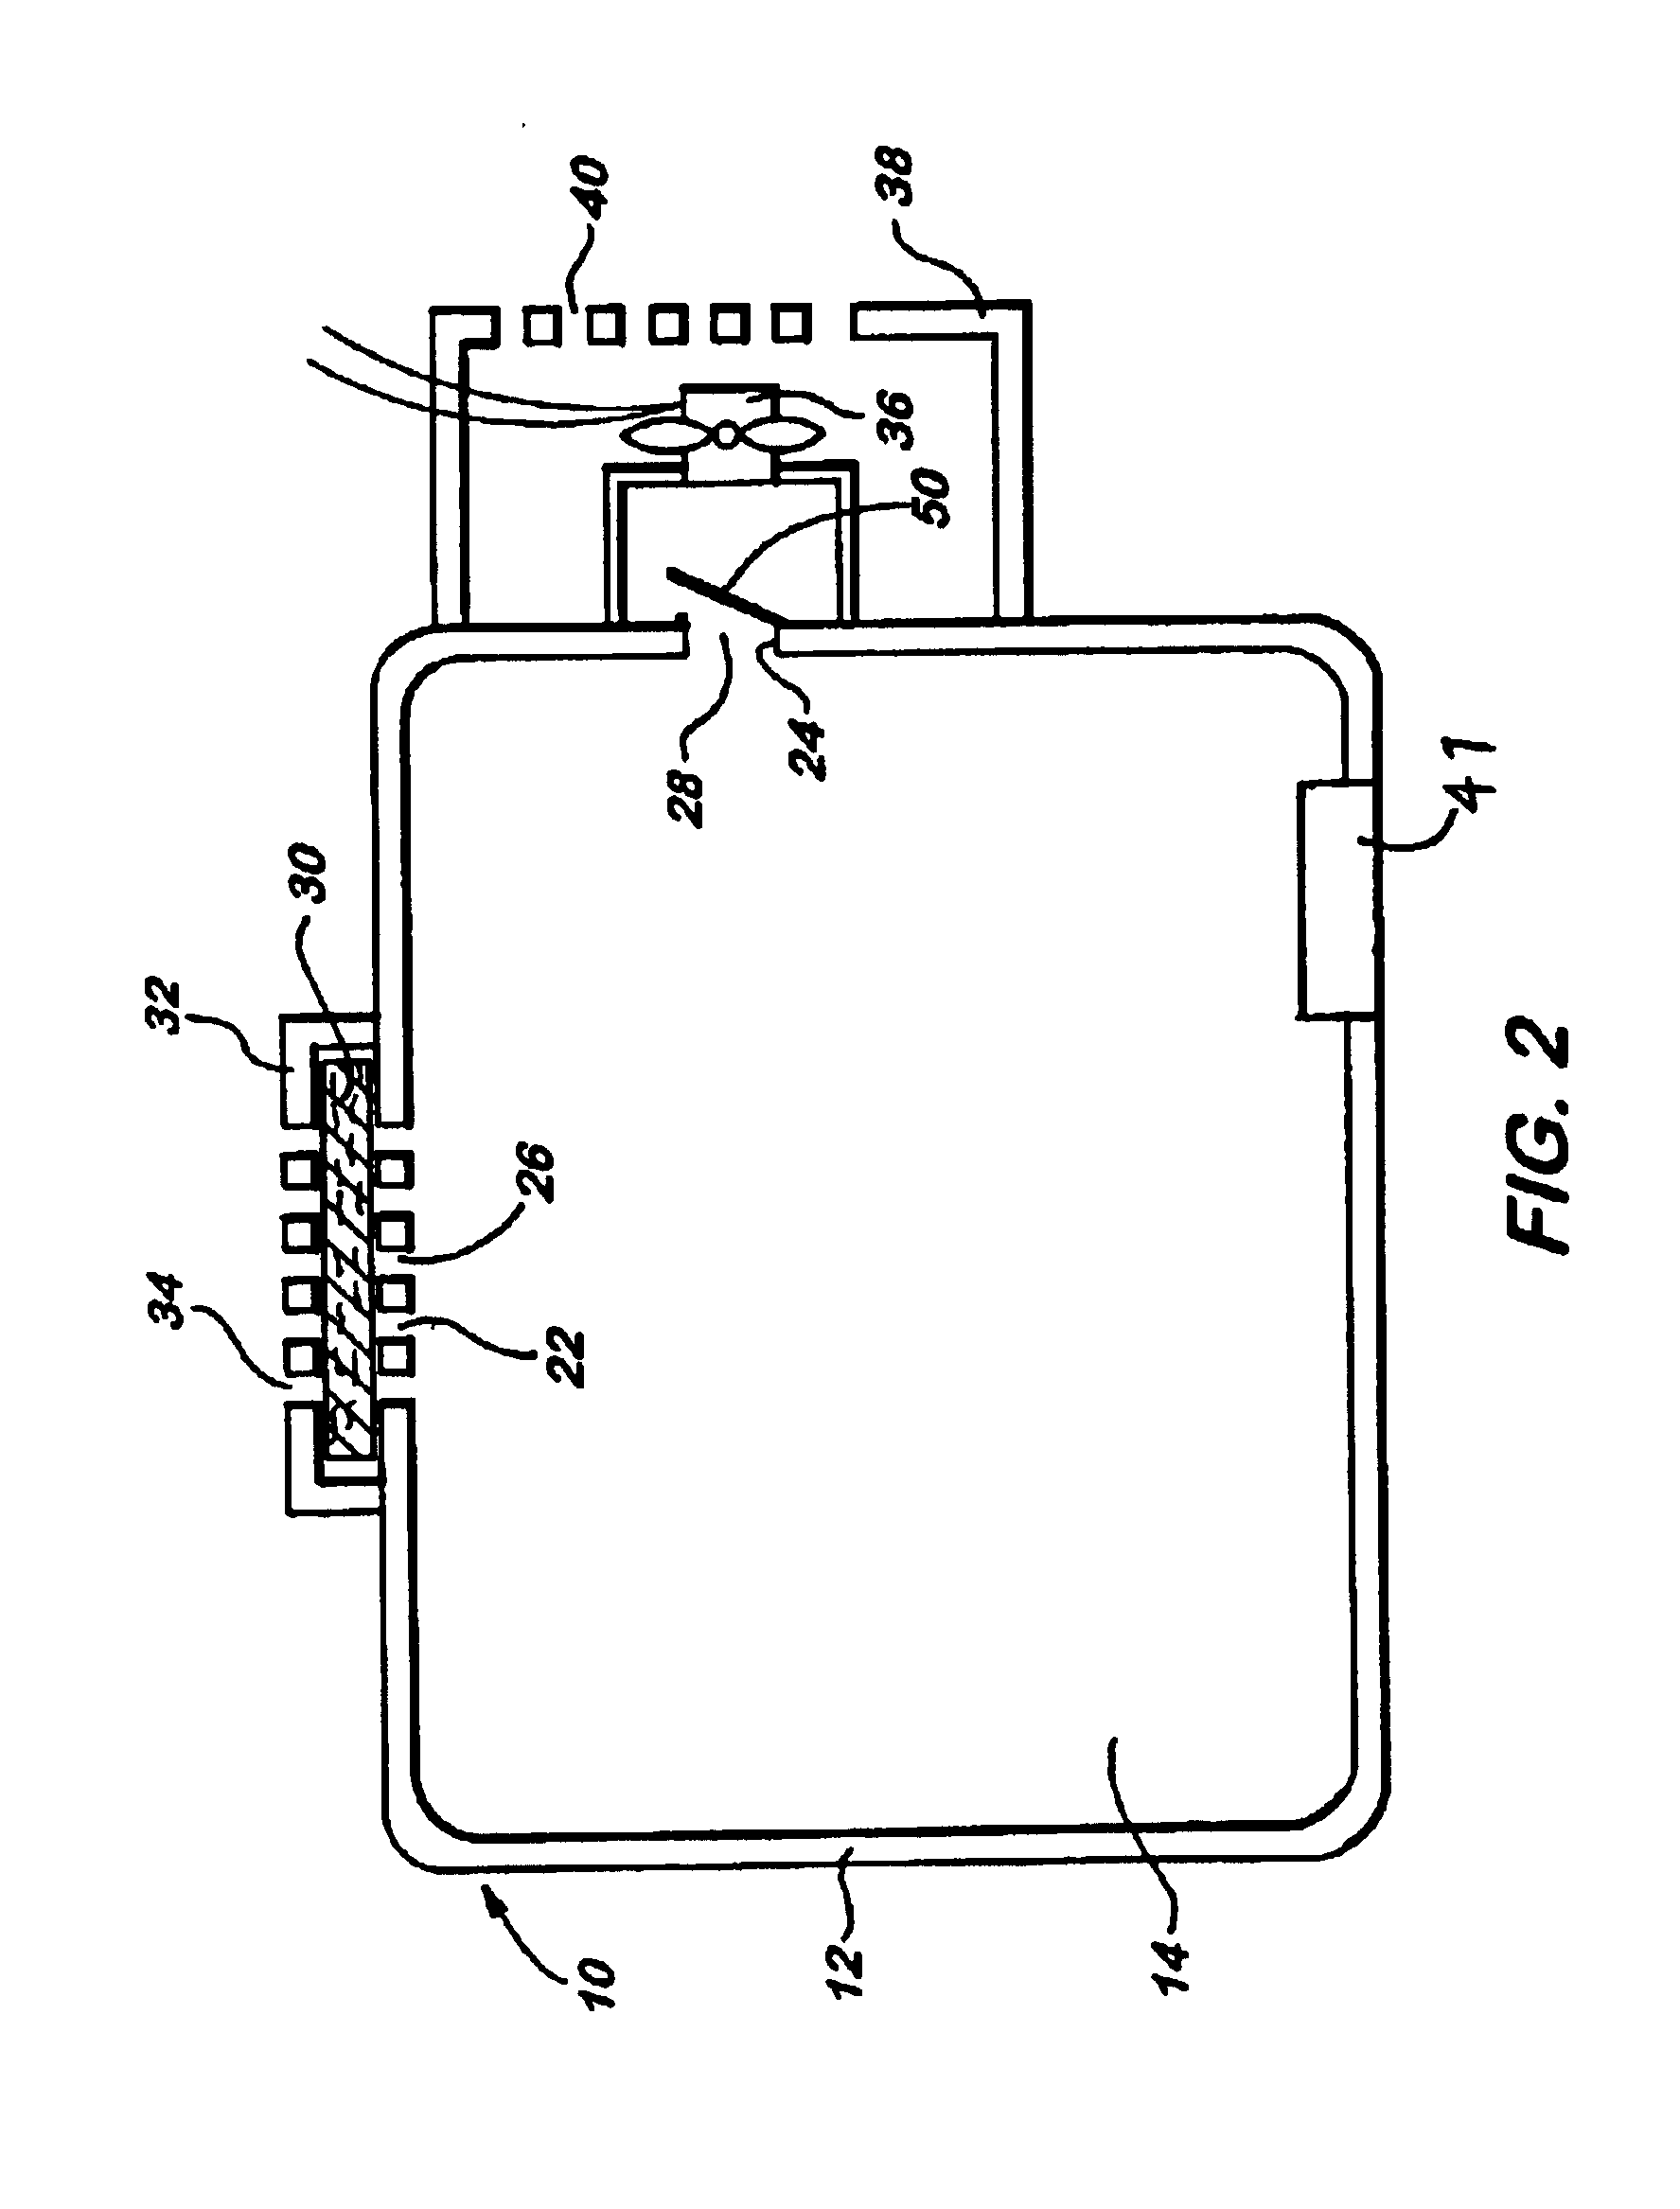 Storage device utilizing a differentially permeable membrane to control gaseous content